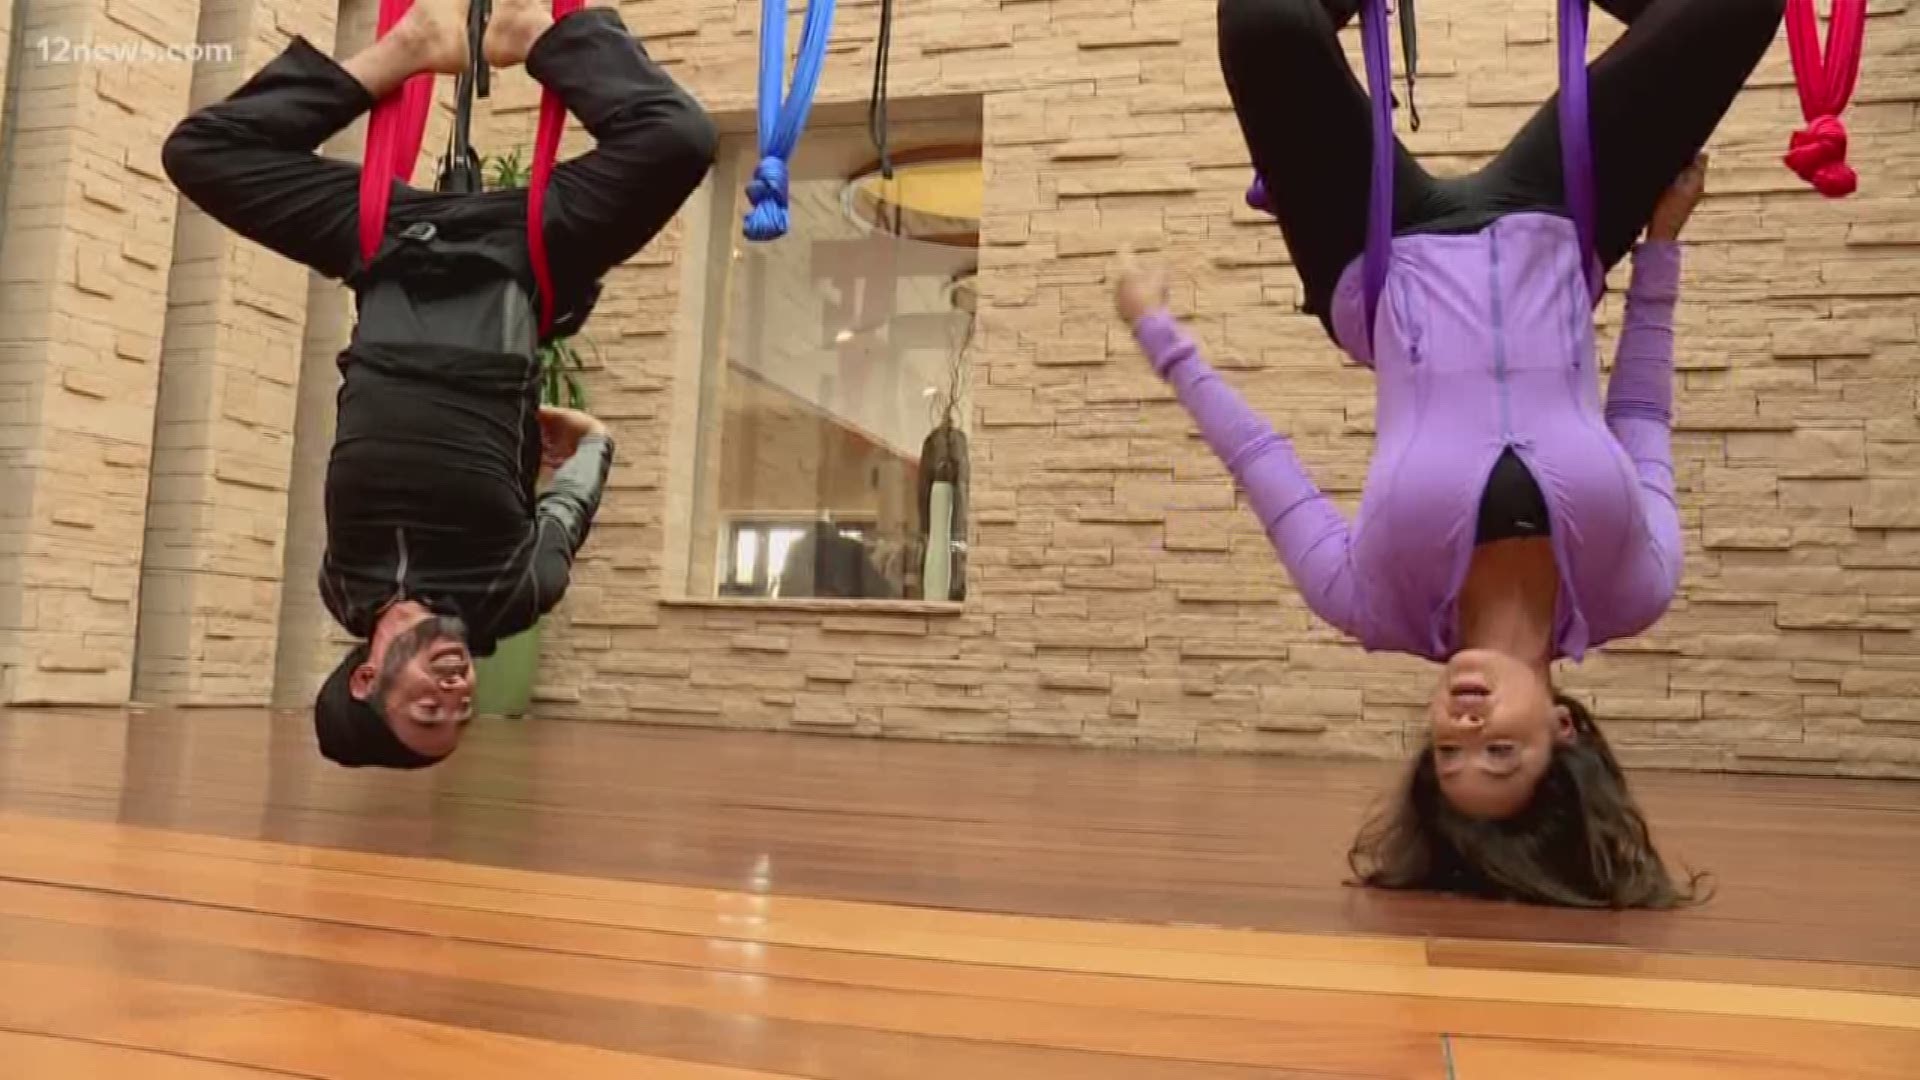 There are all kinds of workouts but only a few allow you to "hang out" while you get your sweat on. Check out aerial yoga for a unique kind of workout.